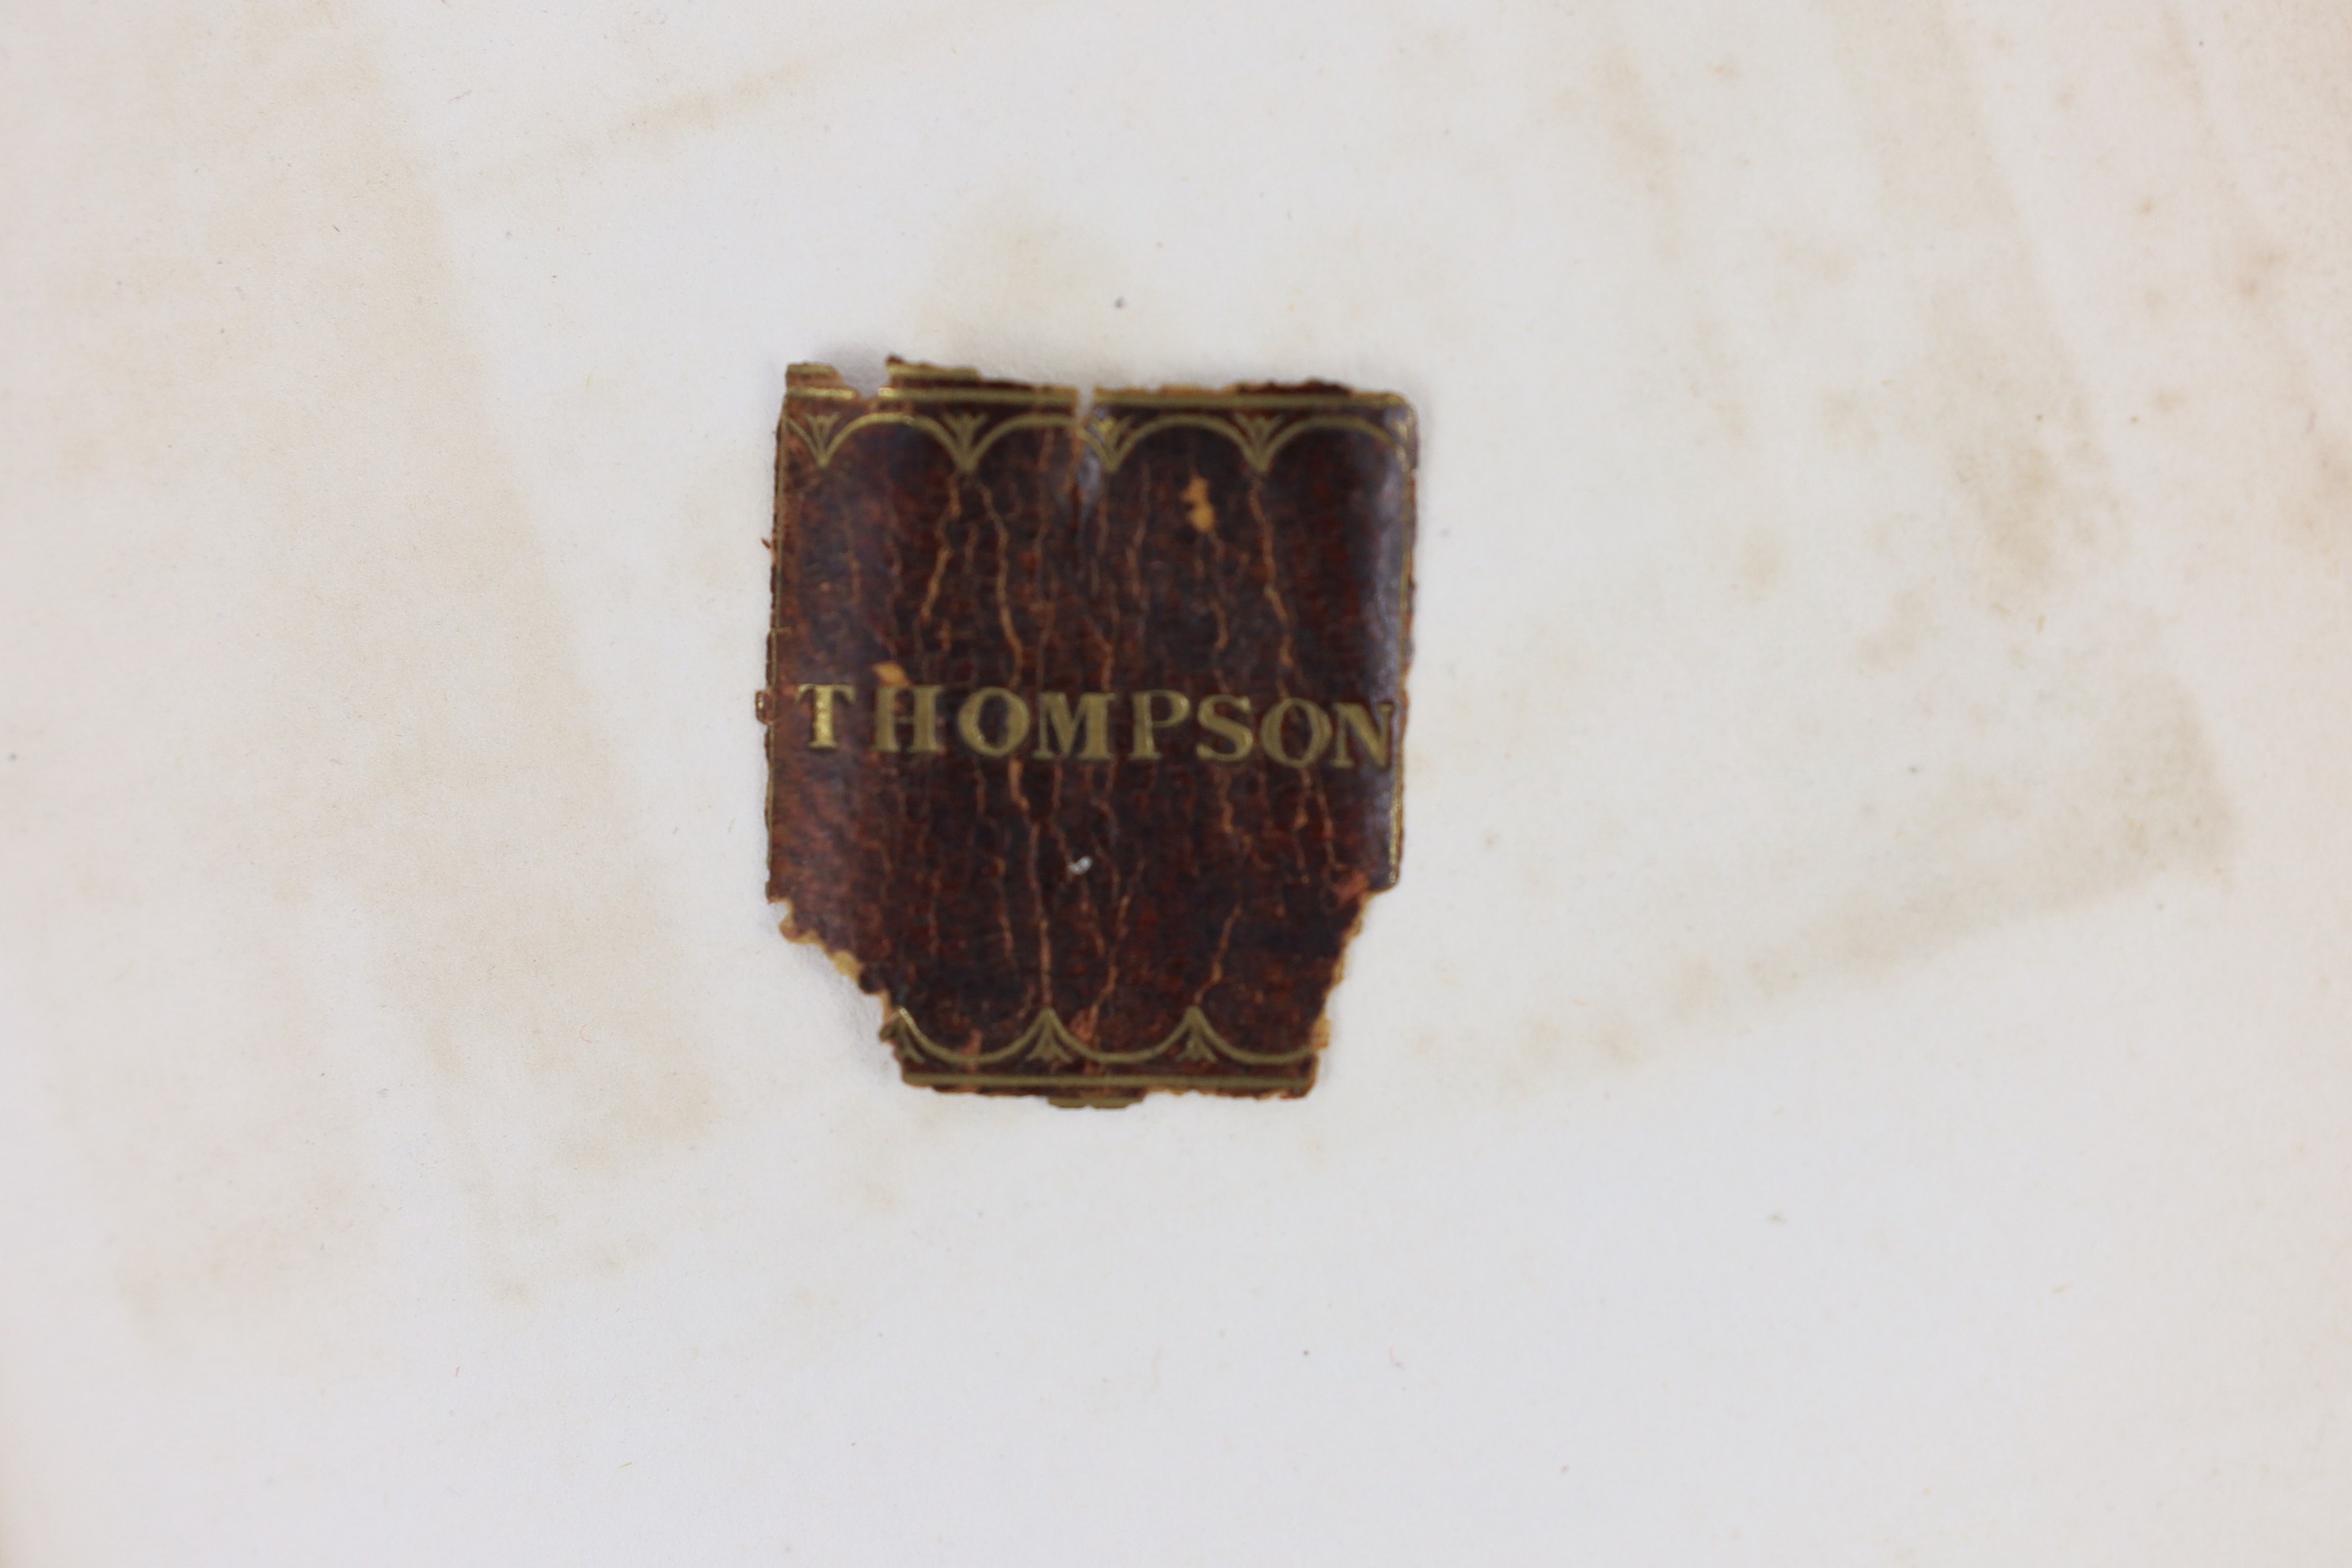 LINCOLNSHIRE: Thompson, Pishey - Collections for a Topographical and Historical Account of Boston, and the Hundred of Skirbeck ...